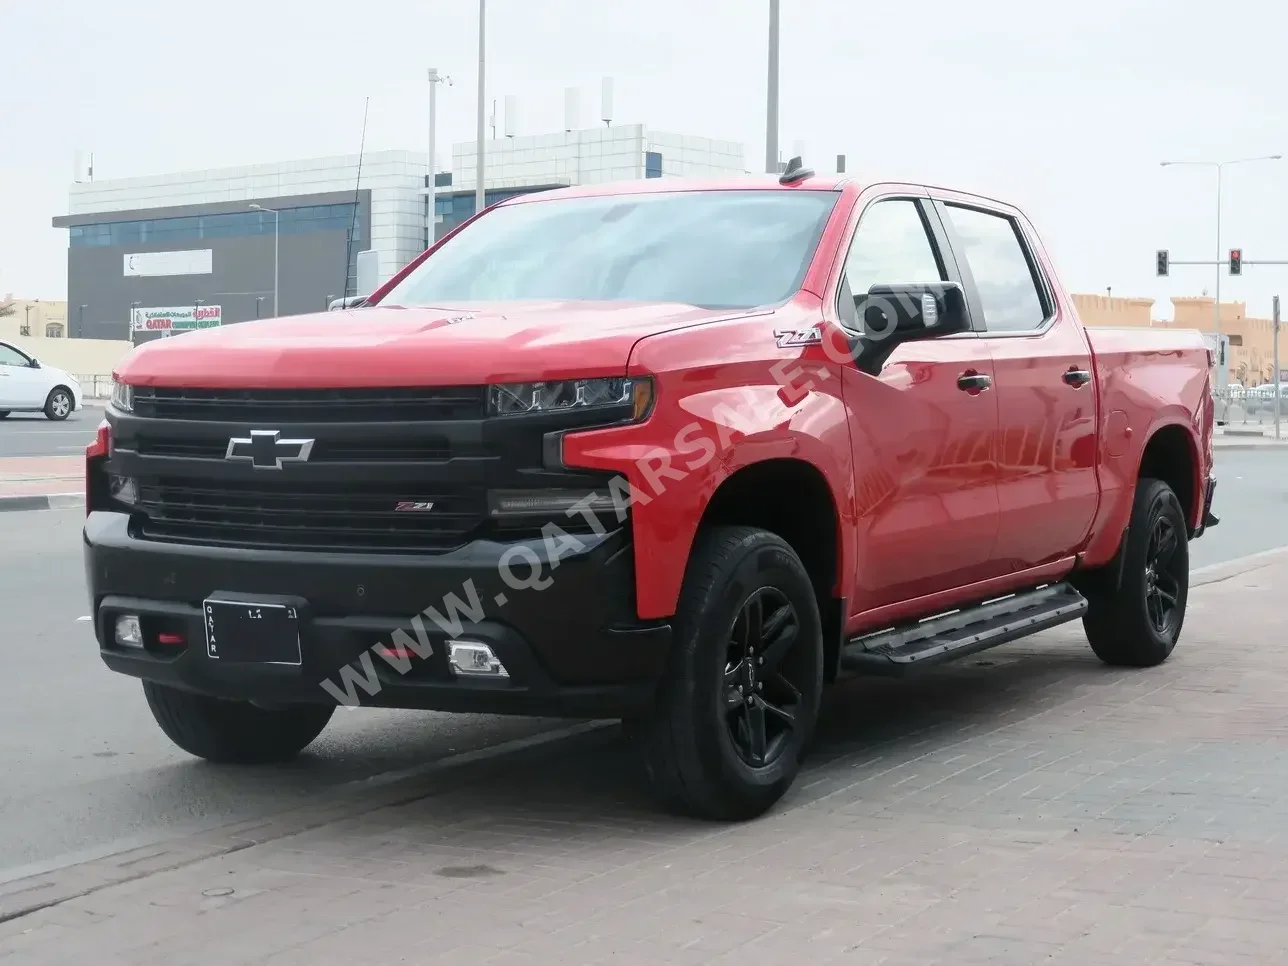  Chevrolet  Silverado  Trail Boss  2020  Automatic  58,000 Km  8 Cylinder  Four Wheel Drive (4WD)  Pick Up  Red  With Warranty